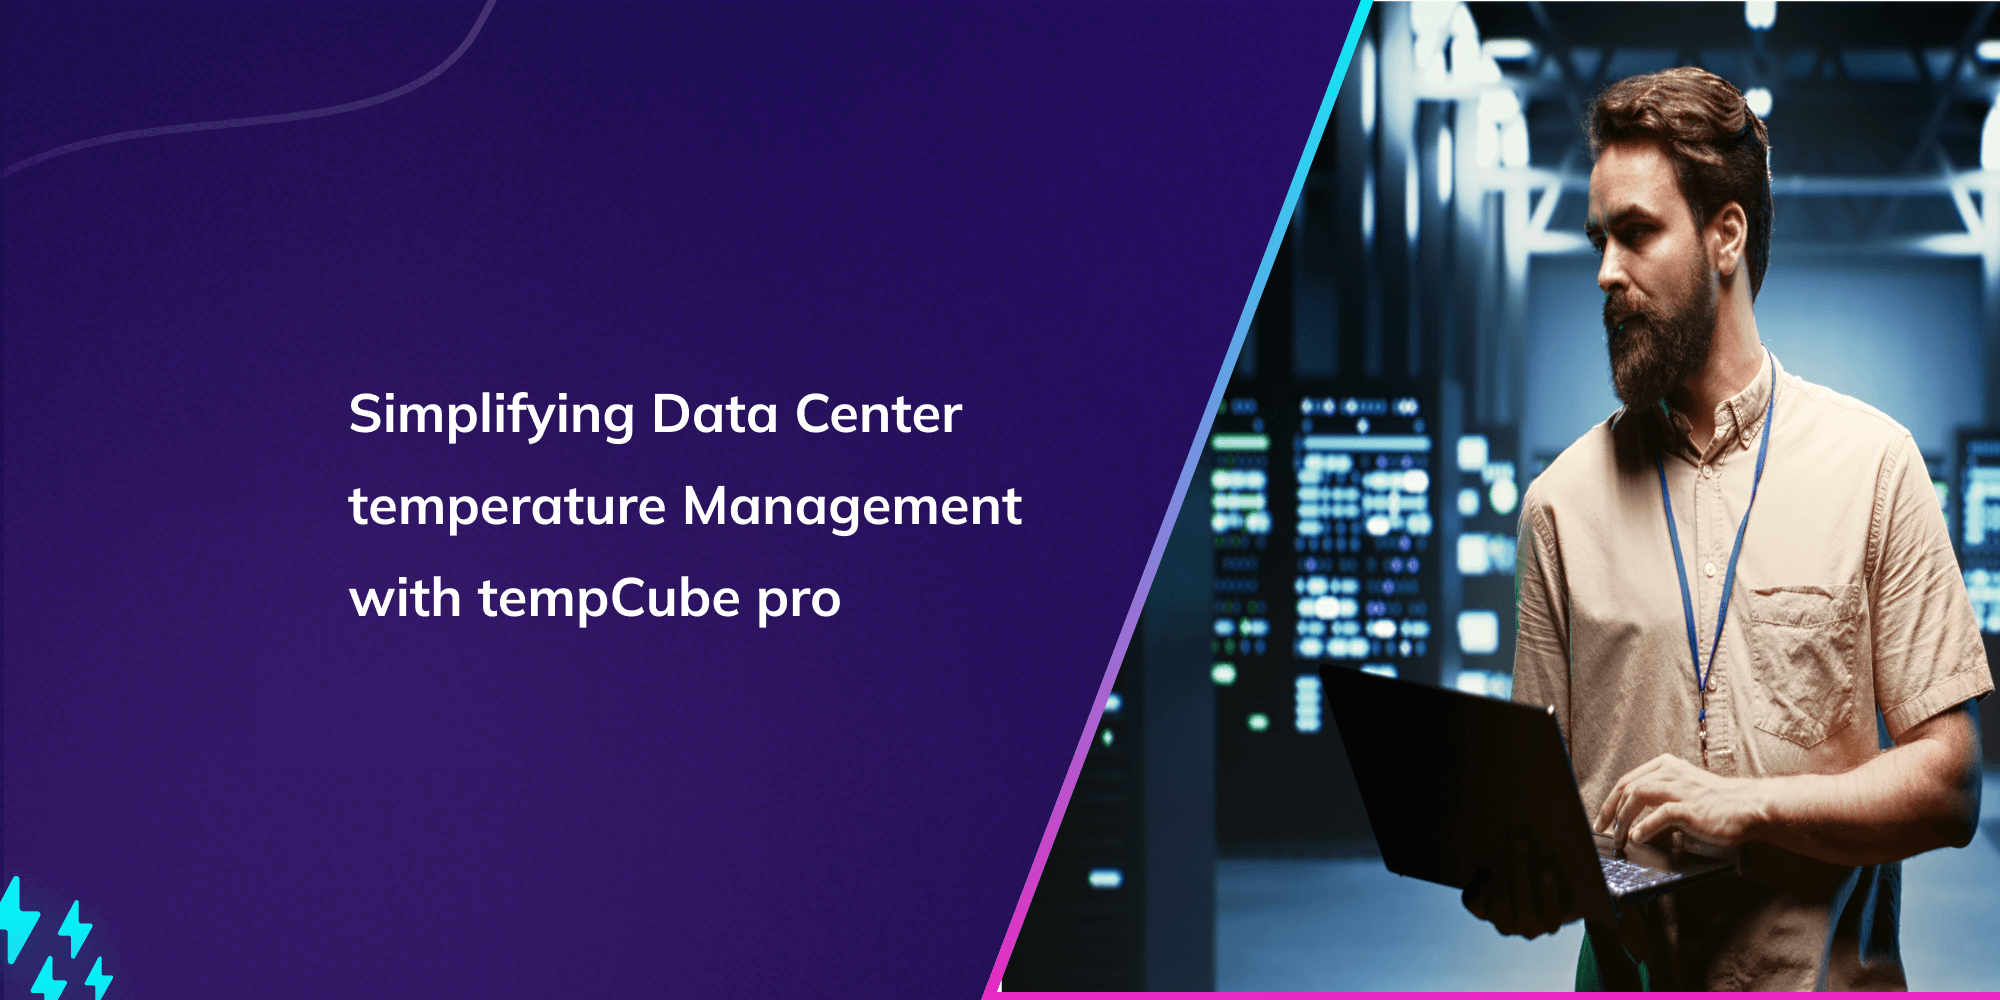 Simplifying Data Center temperature Management with tempCube pro